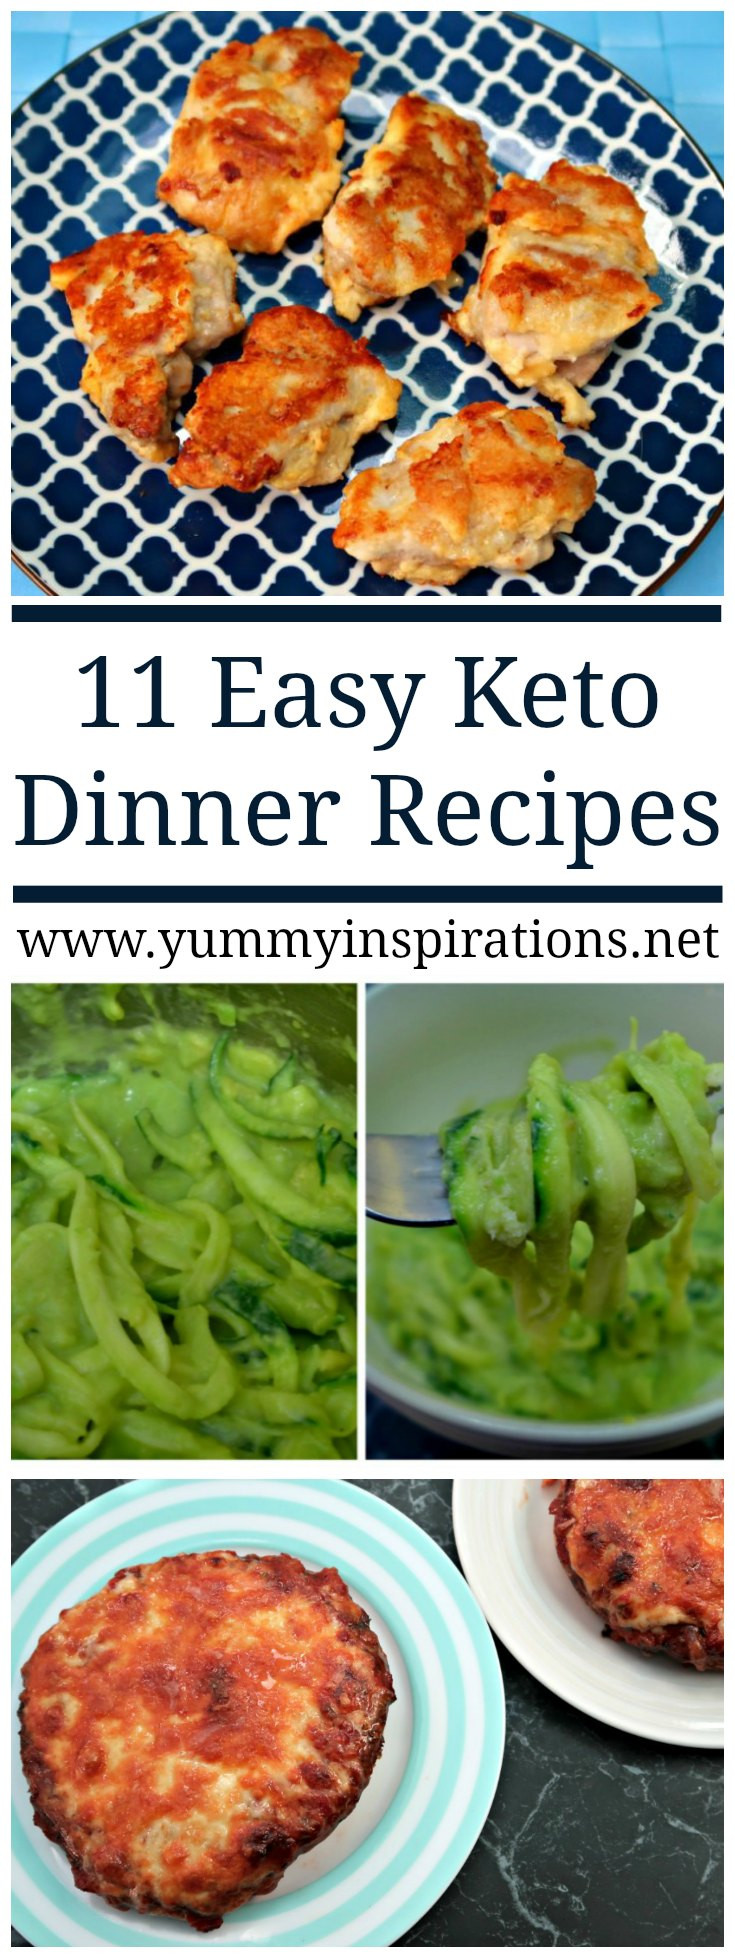 Easy Keto Dinner Quick
 11 Easy Keto Dinner Recipes Quick Low Carb Ketogenic